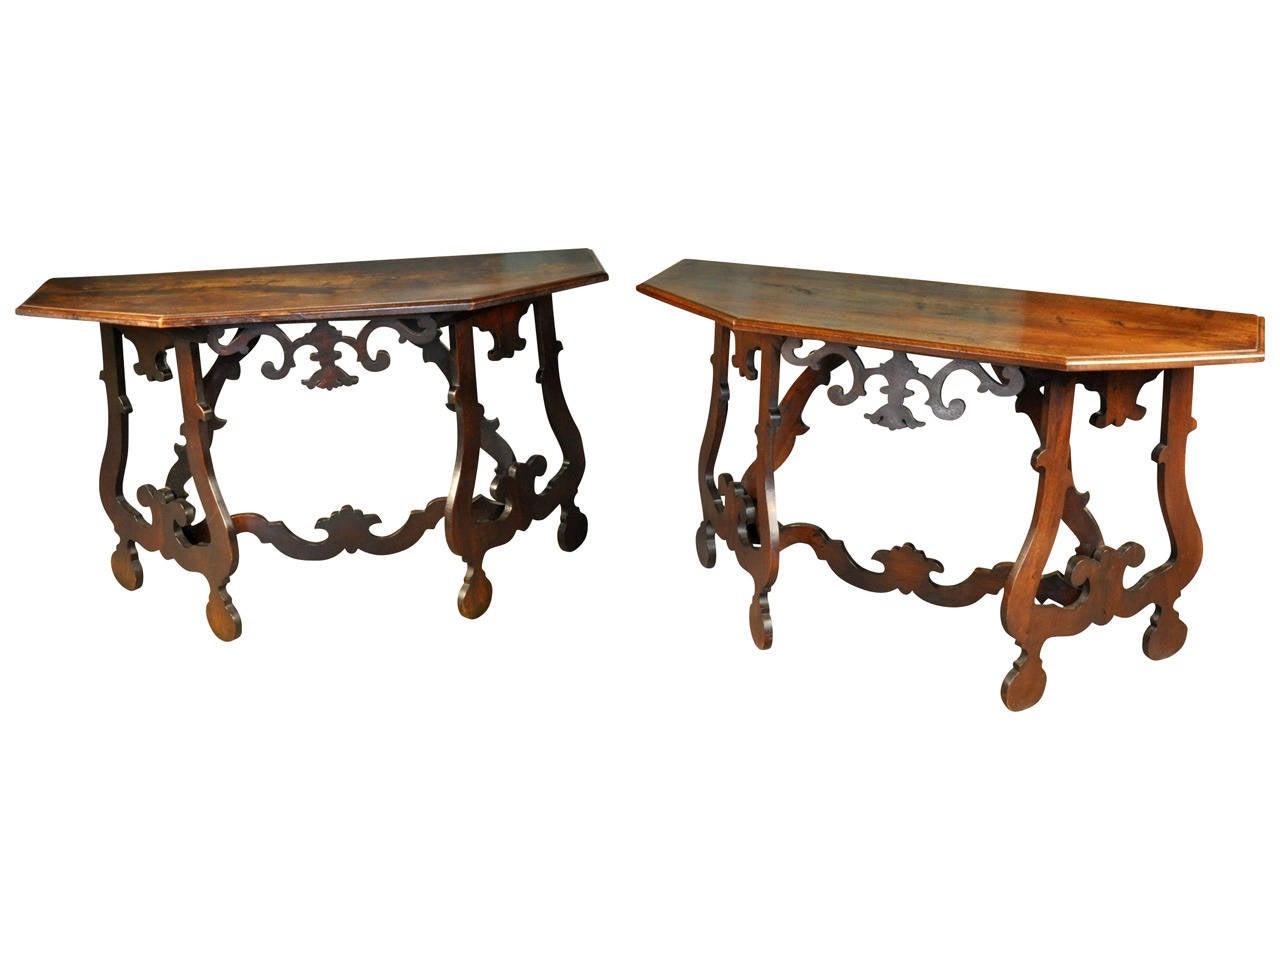 A pair of Northern Italian 19th century demilune consoles in walnut and mahogany.  Beautifully constructed with shaped trestle supports joined by a carved stretcher.